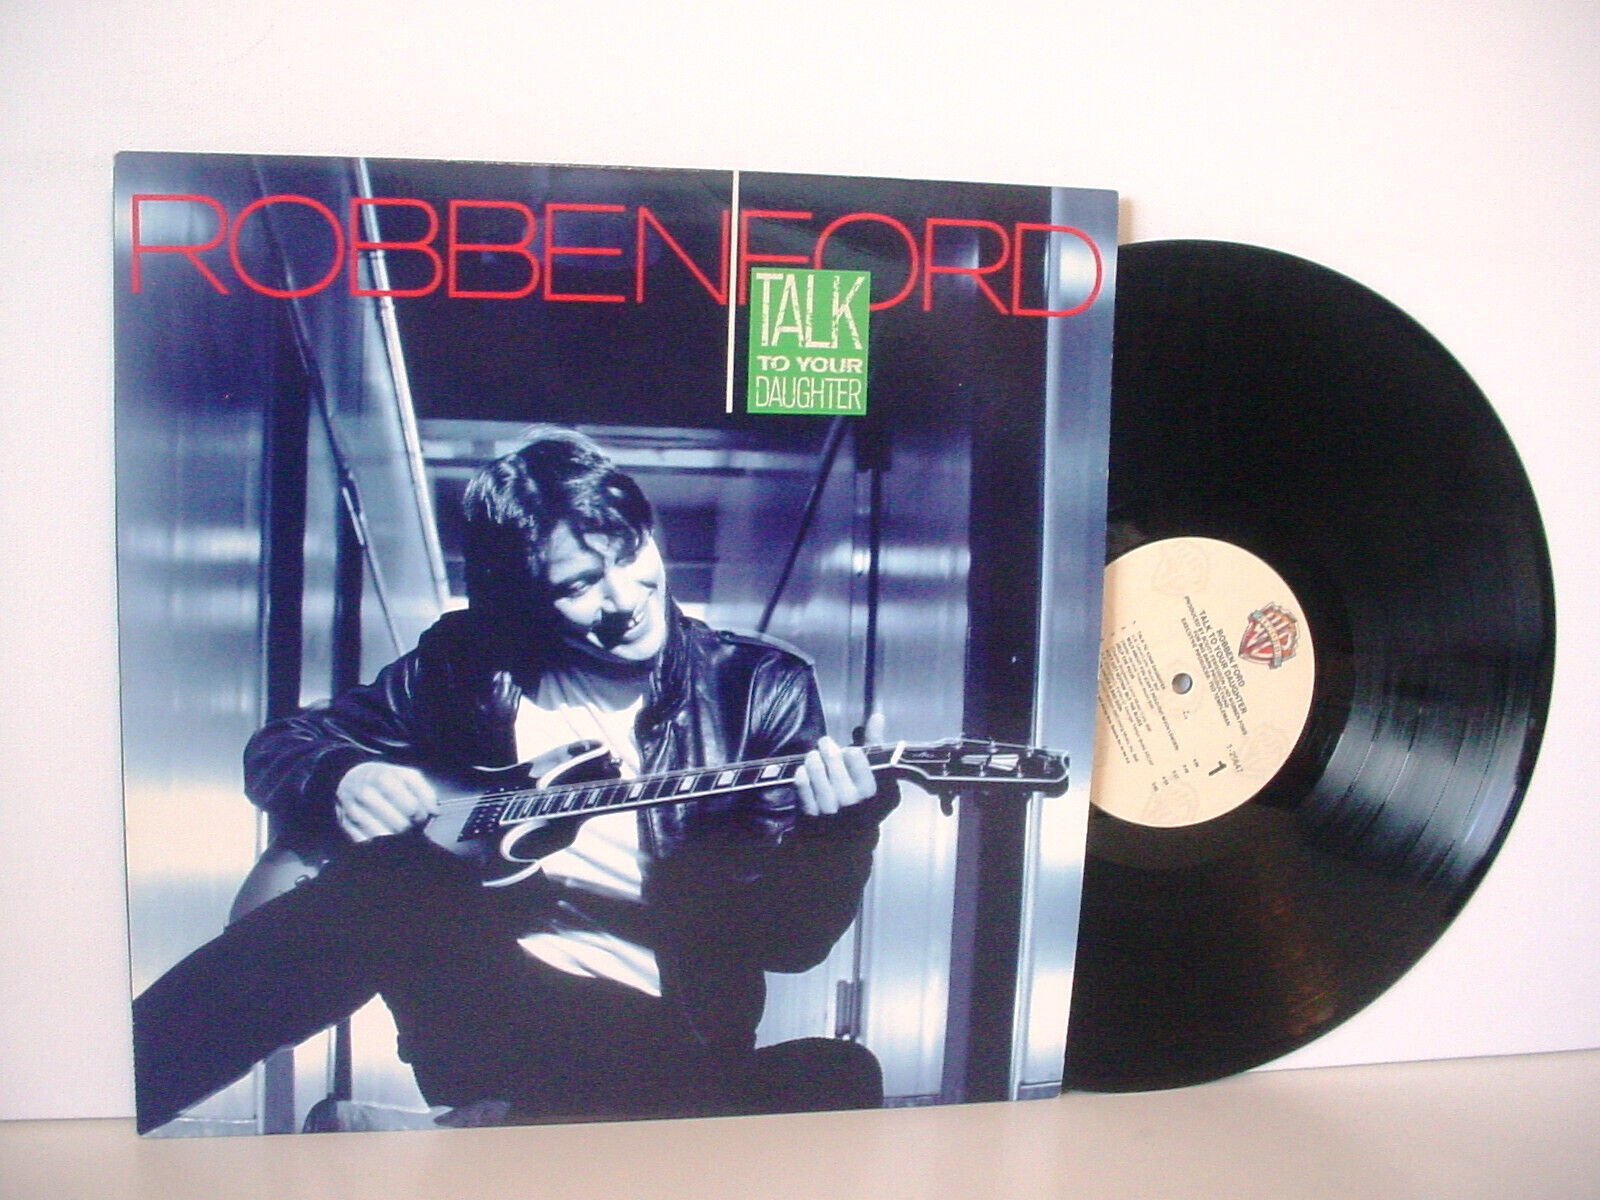 ROBBEN FORD "Talk To Your Daughter" Original VINYL LP from 1988 (WB 25647).